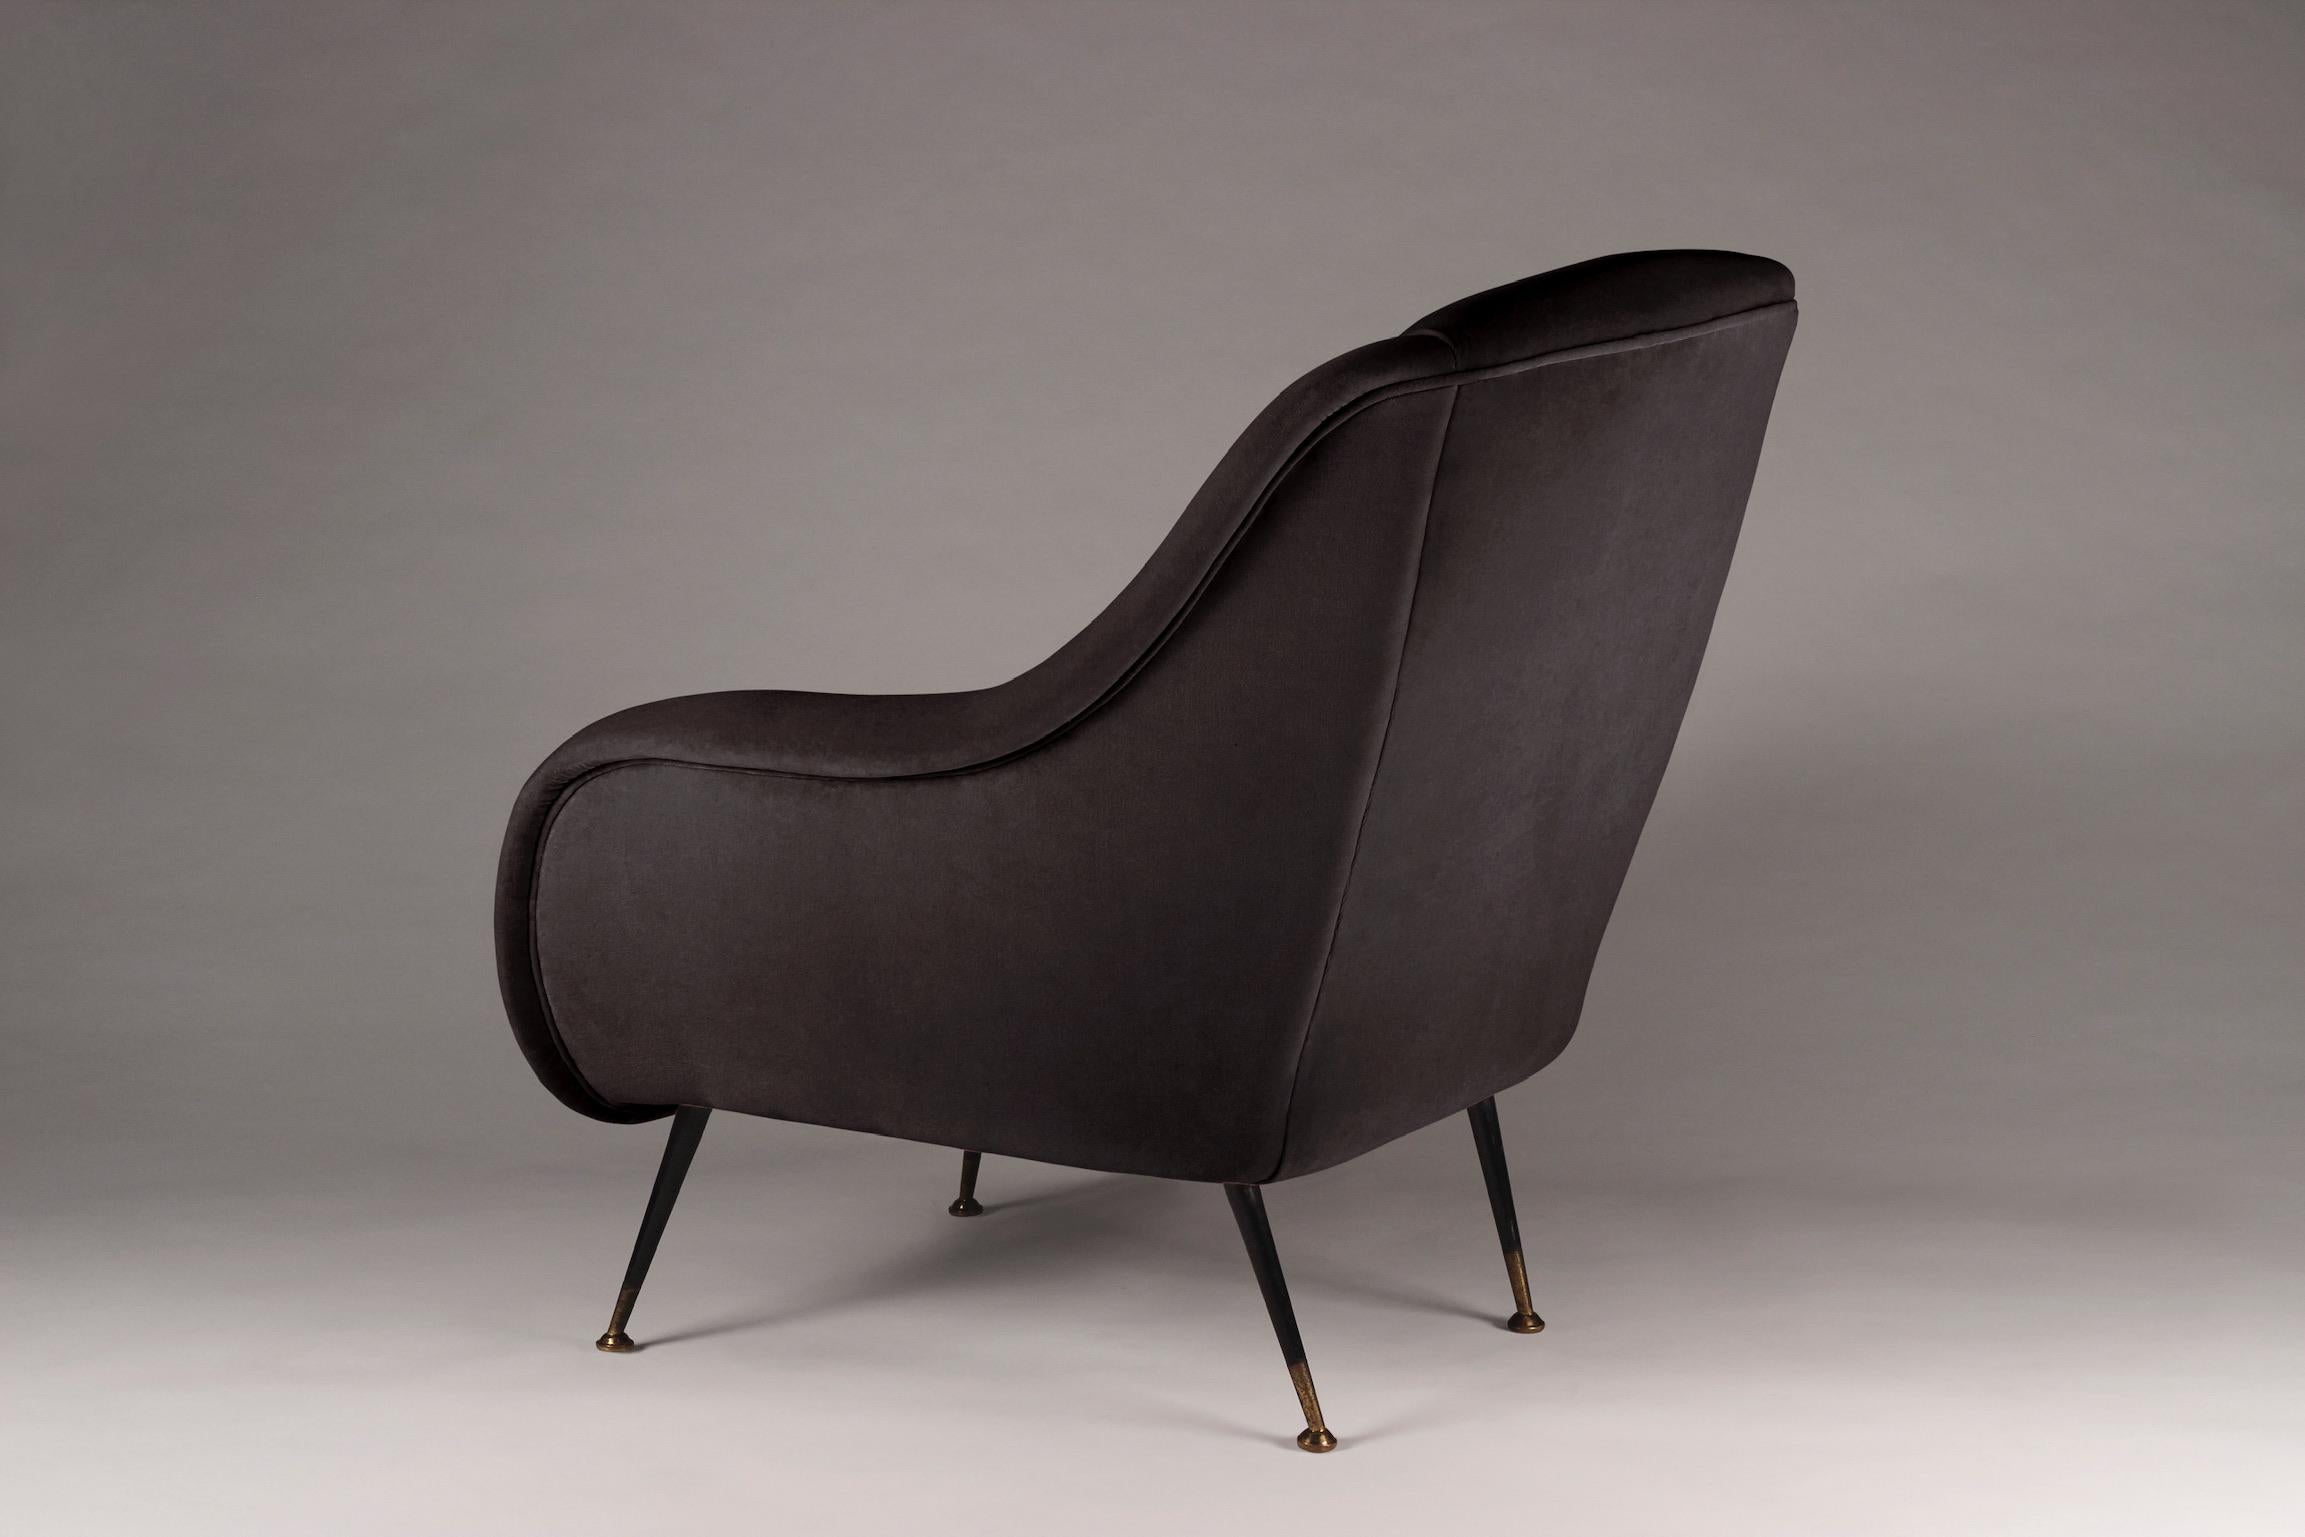 Contemporary Midcentury Style Italian Lounge Chair Black For Sale